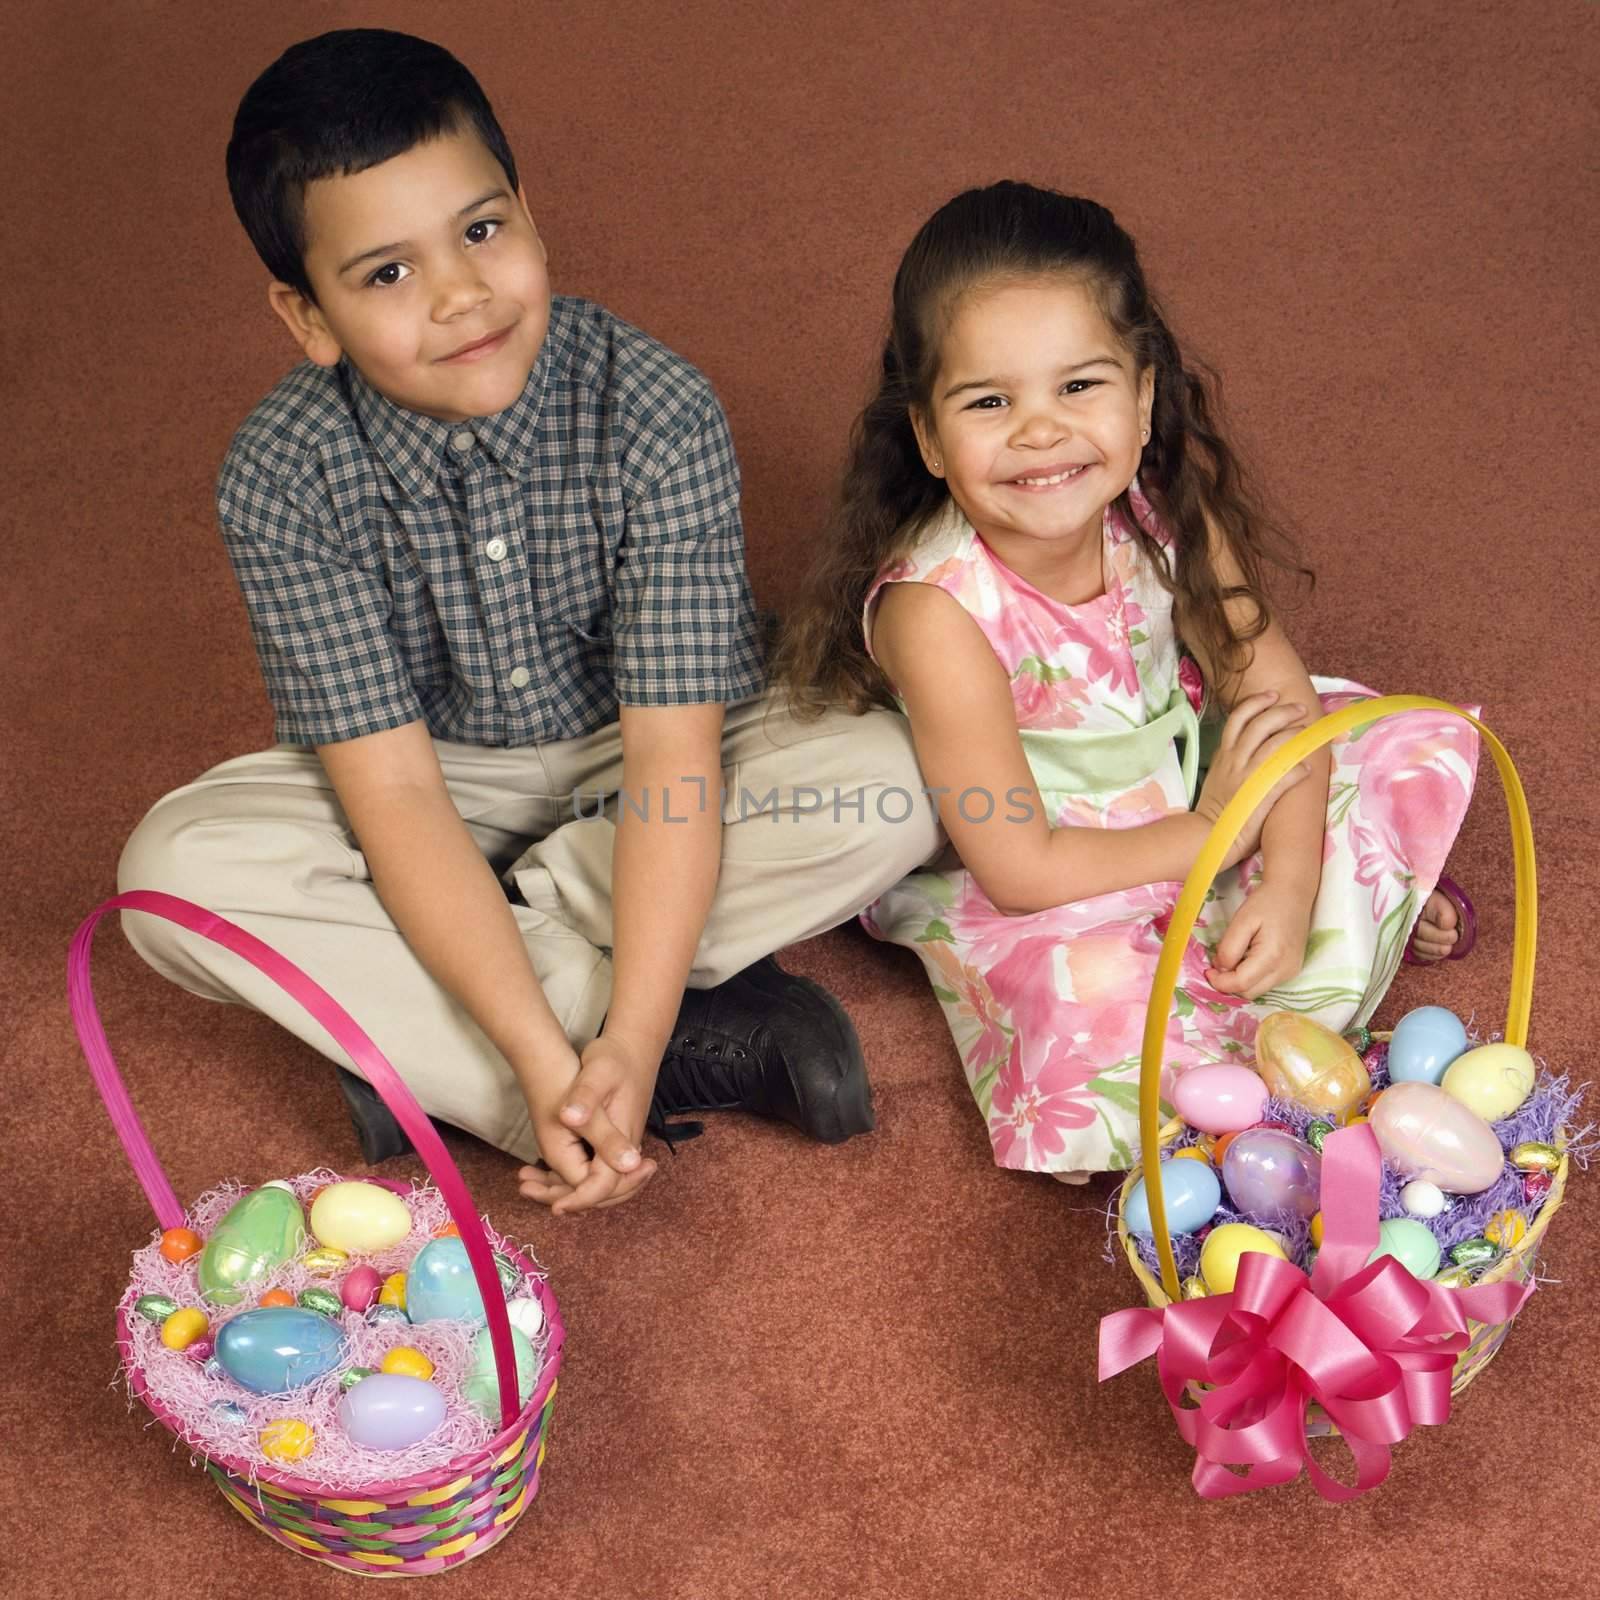 Hispanic brother and sister sitting on floor with Easter baskets looking up at viewer smiling.